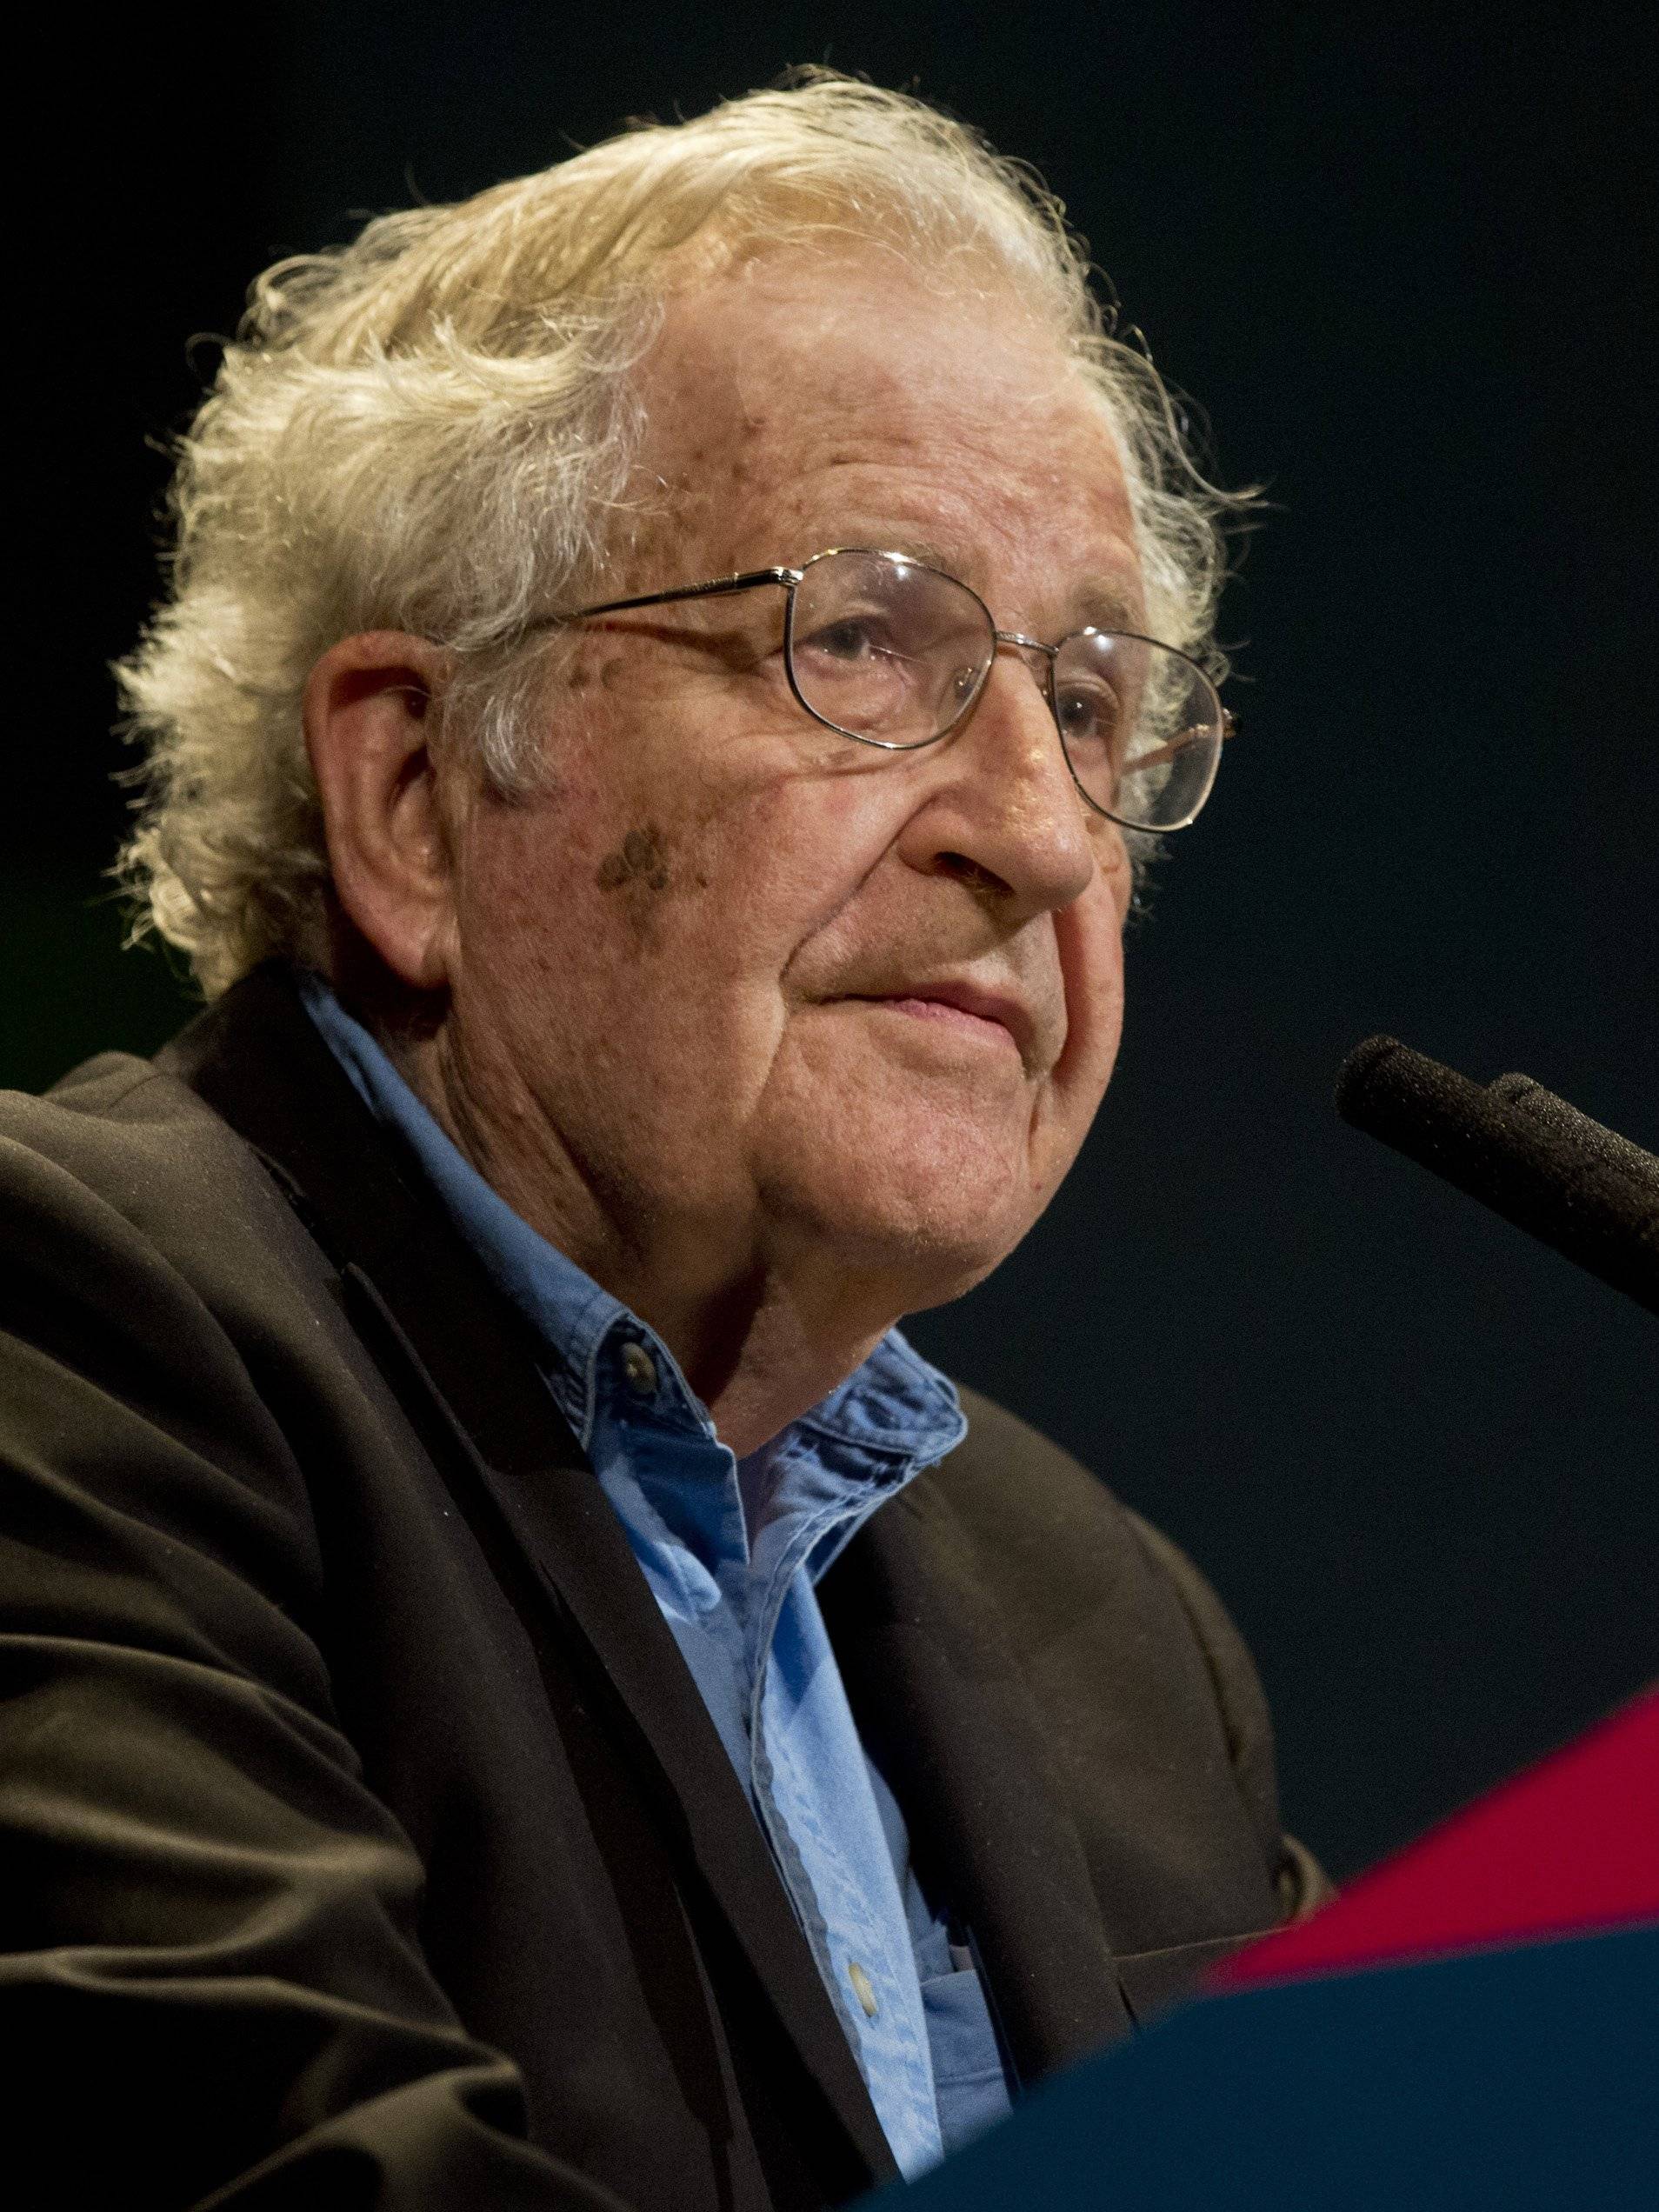 Noam Chomsky, six other international figures call for release of the Catalan prisoners